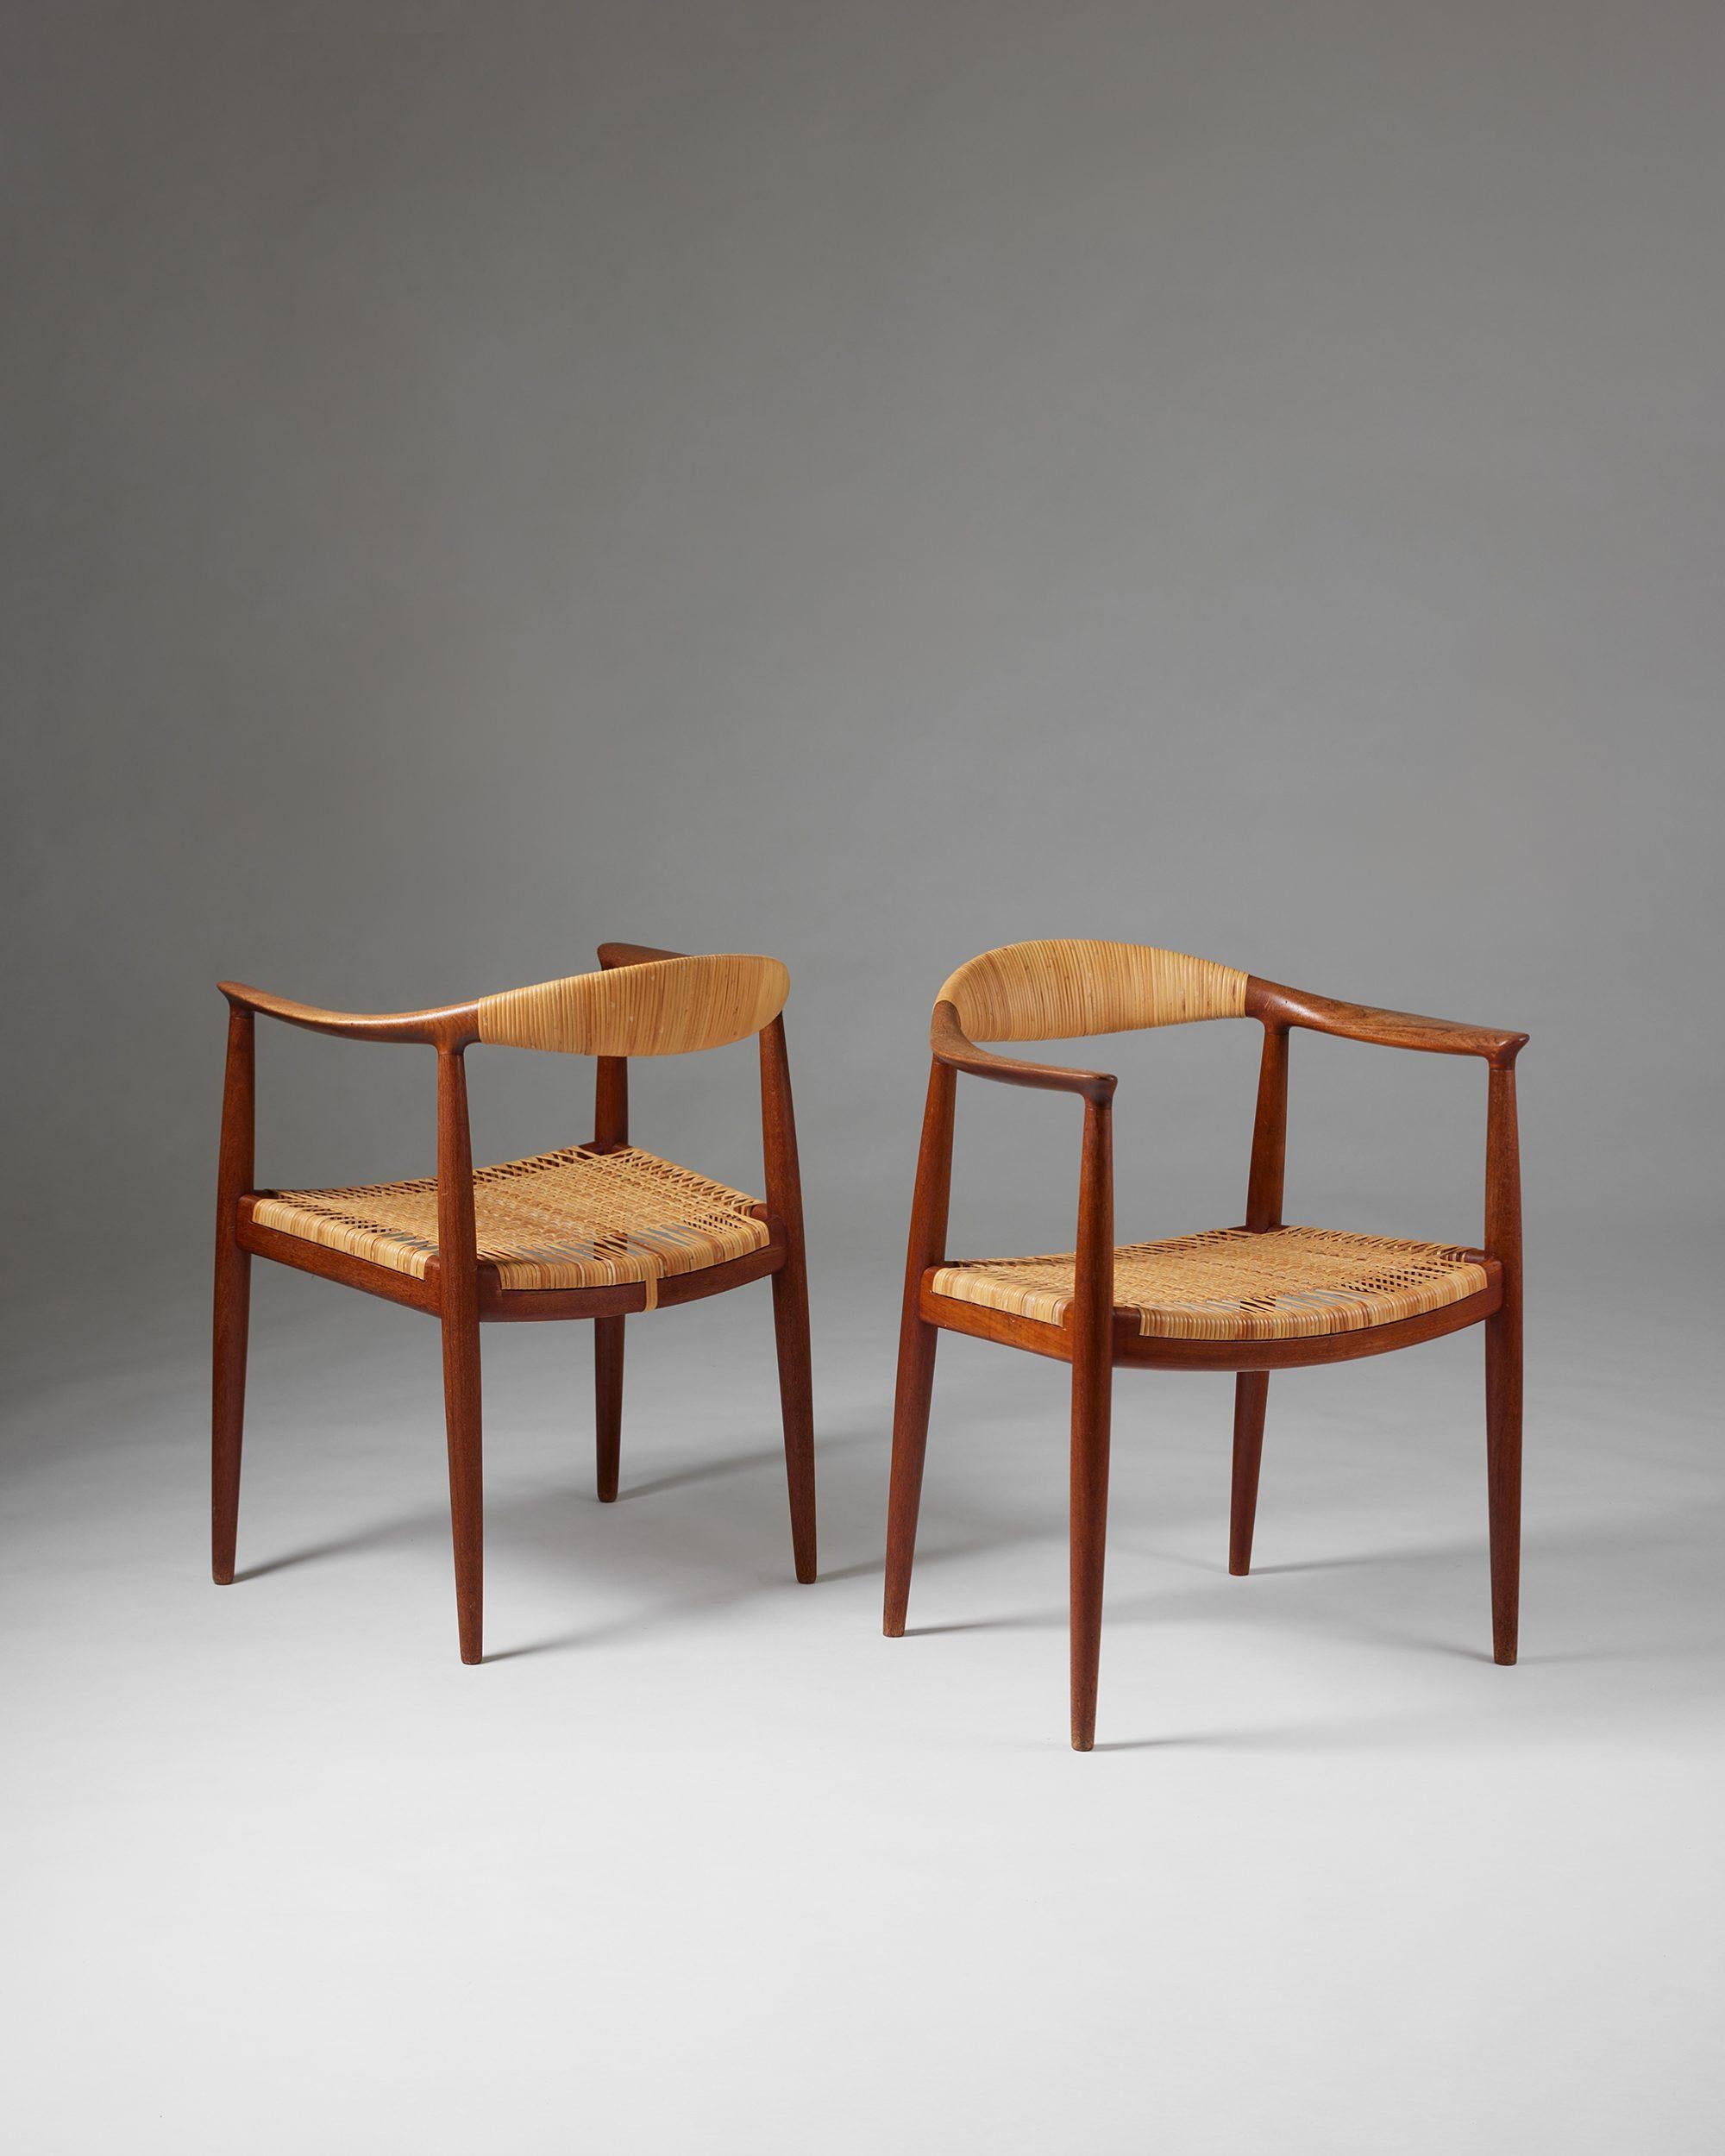 Pair of armchairs ‘The Chair’ model JH 501 designed by Hans J. Wegner for Johannes Hansen,
Denmark, 1949.

Teak and cane.

Early model with the caned backrest.

Stamped.

H: 76 cm
W: 63 cm
D: 50 cm
Arm height: 68.5 cm
Seat height: 44 cm

Hans J.